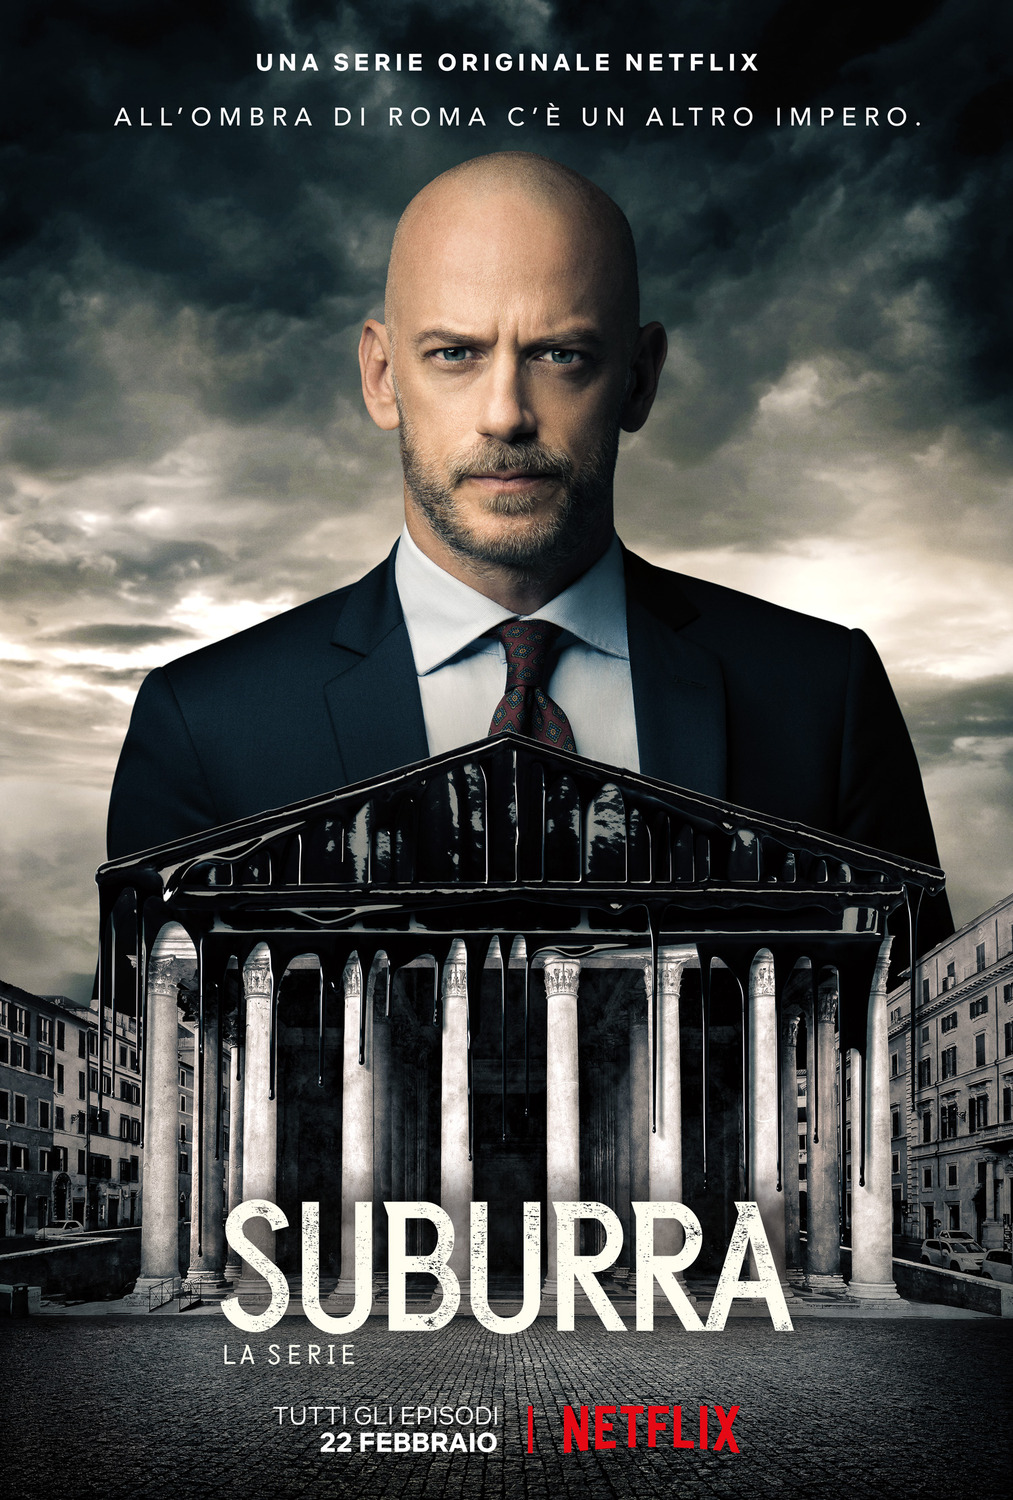 Extra Large TV Poster Image for Suburra: la serie (#6 of 12)